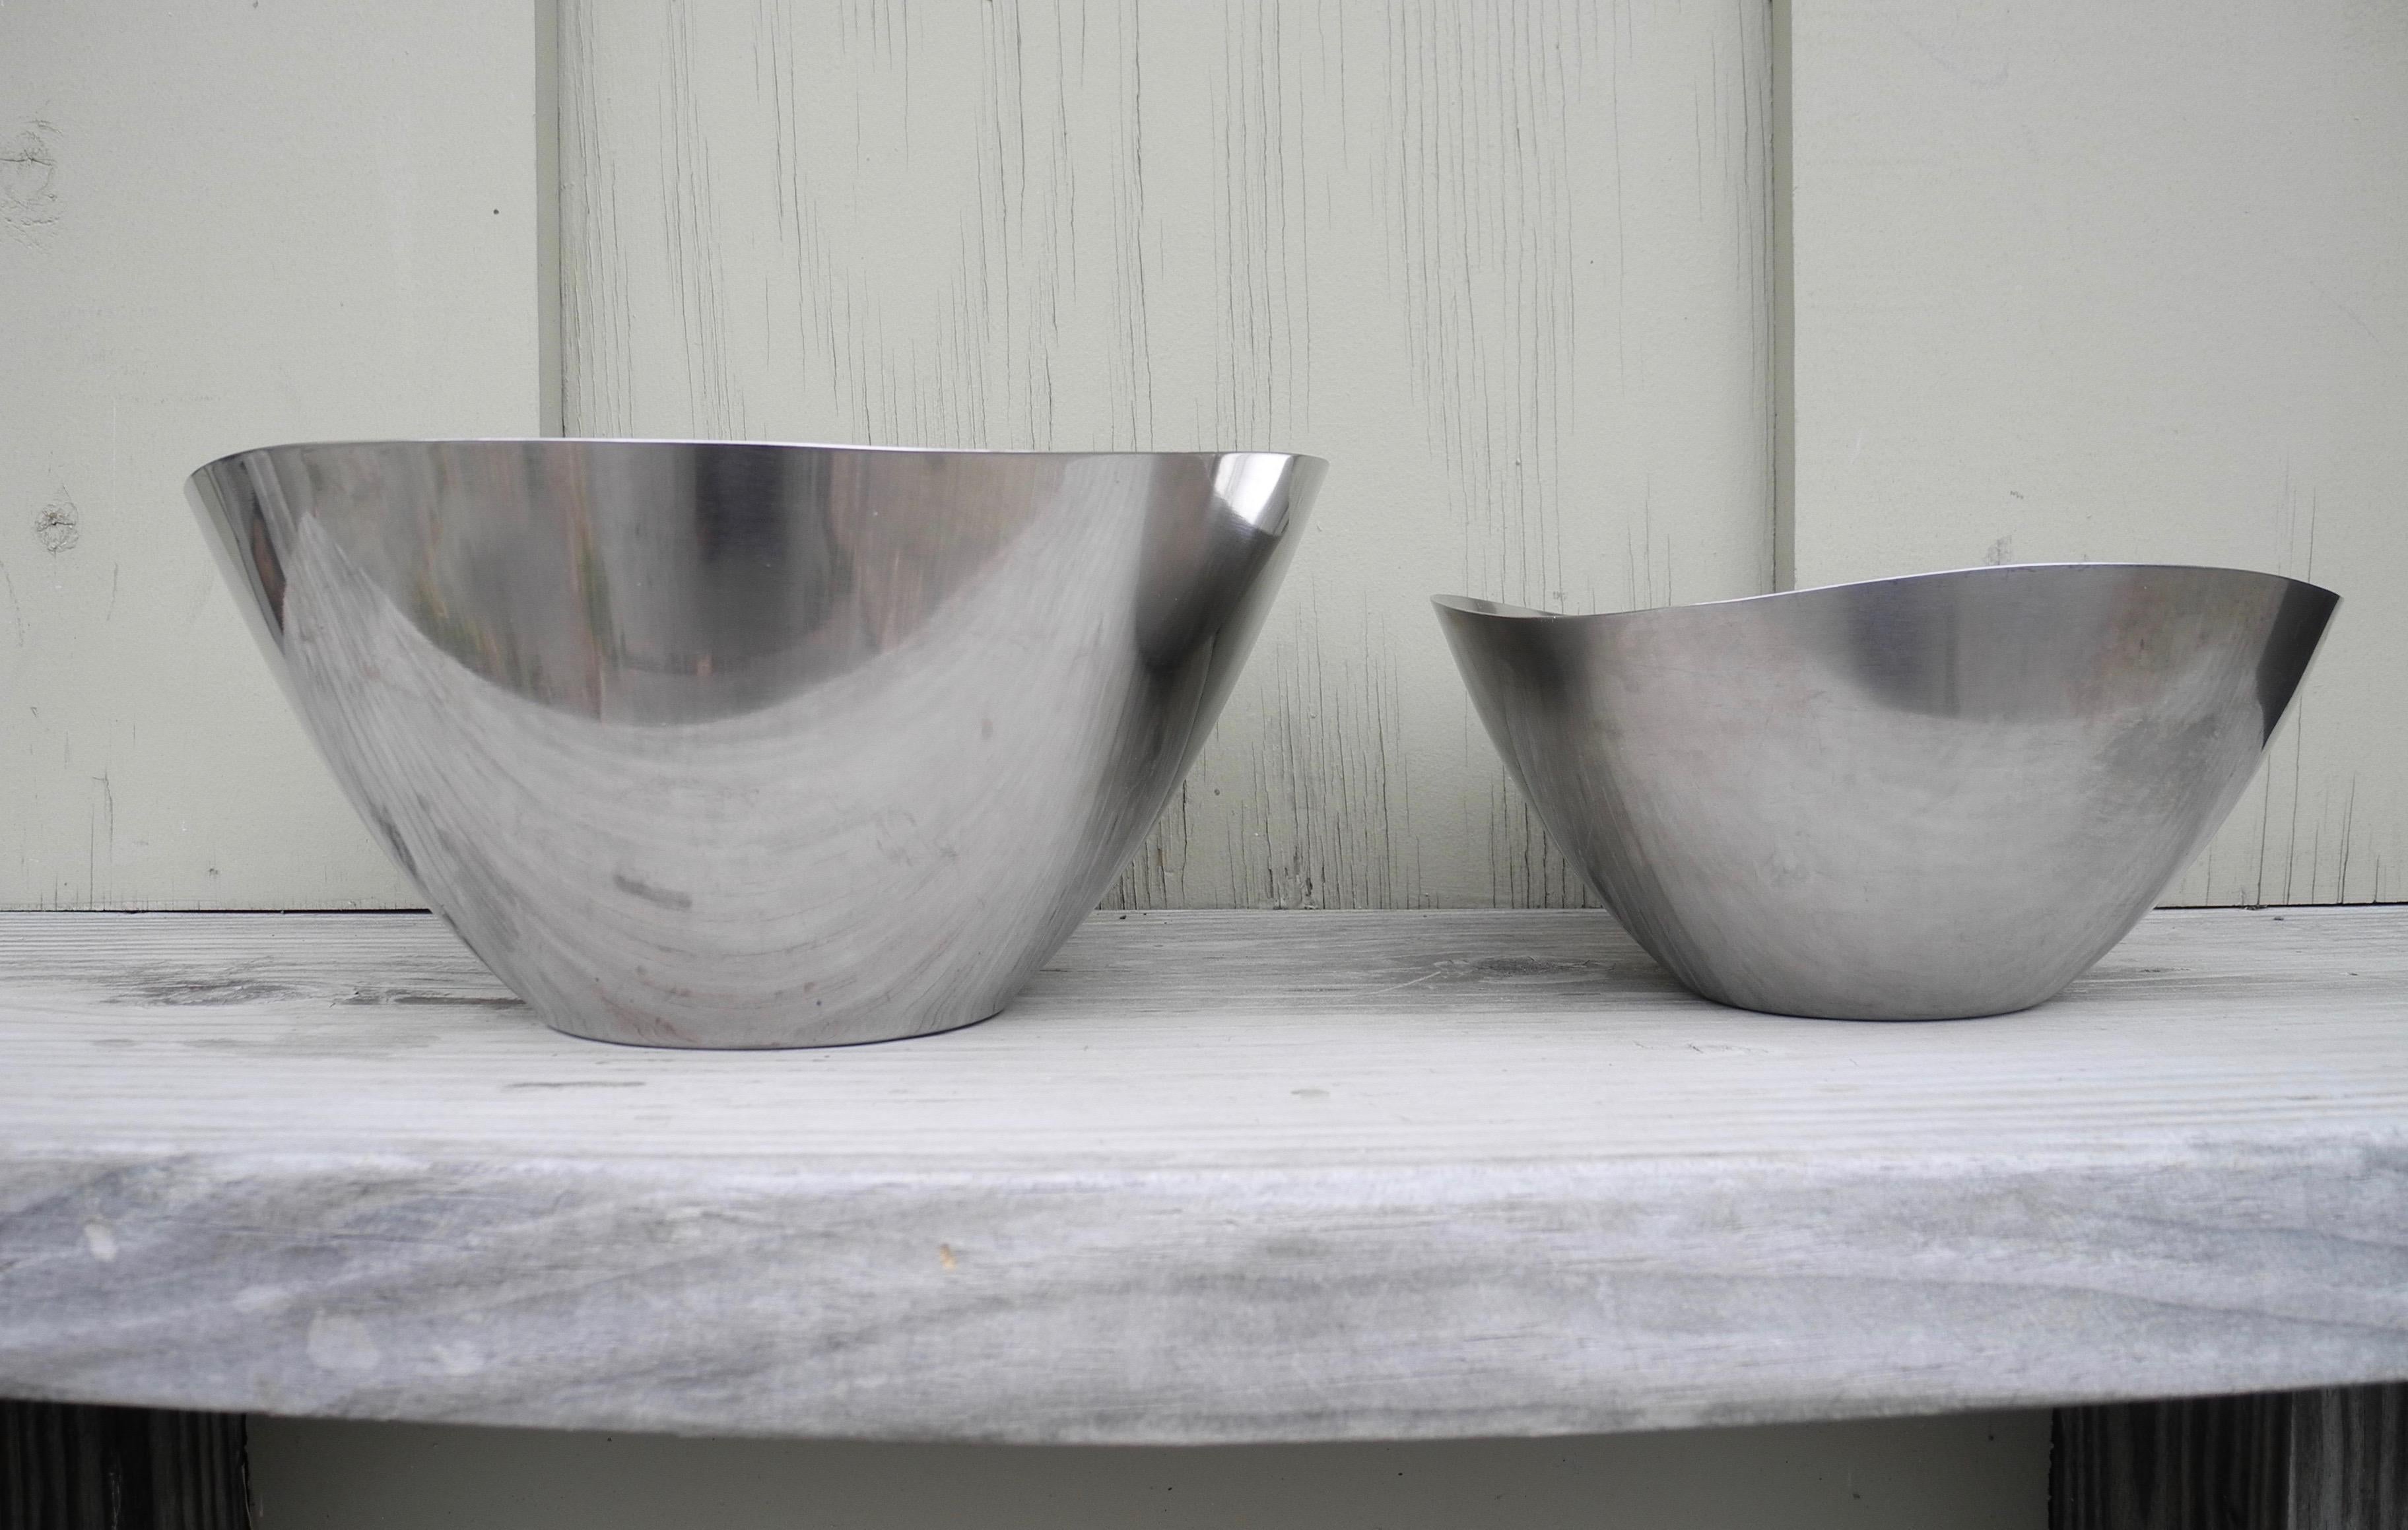 These vintage biomorphic sculptural serving bowls are made by Stelton stainless steel of Denmark.
One fits inside the other. 18/8 gauge steel.